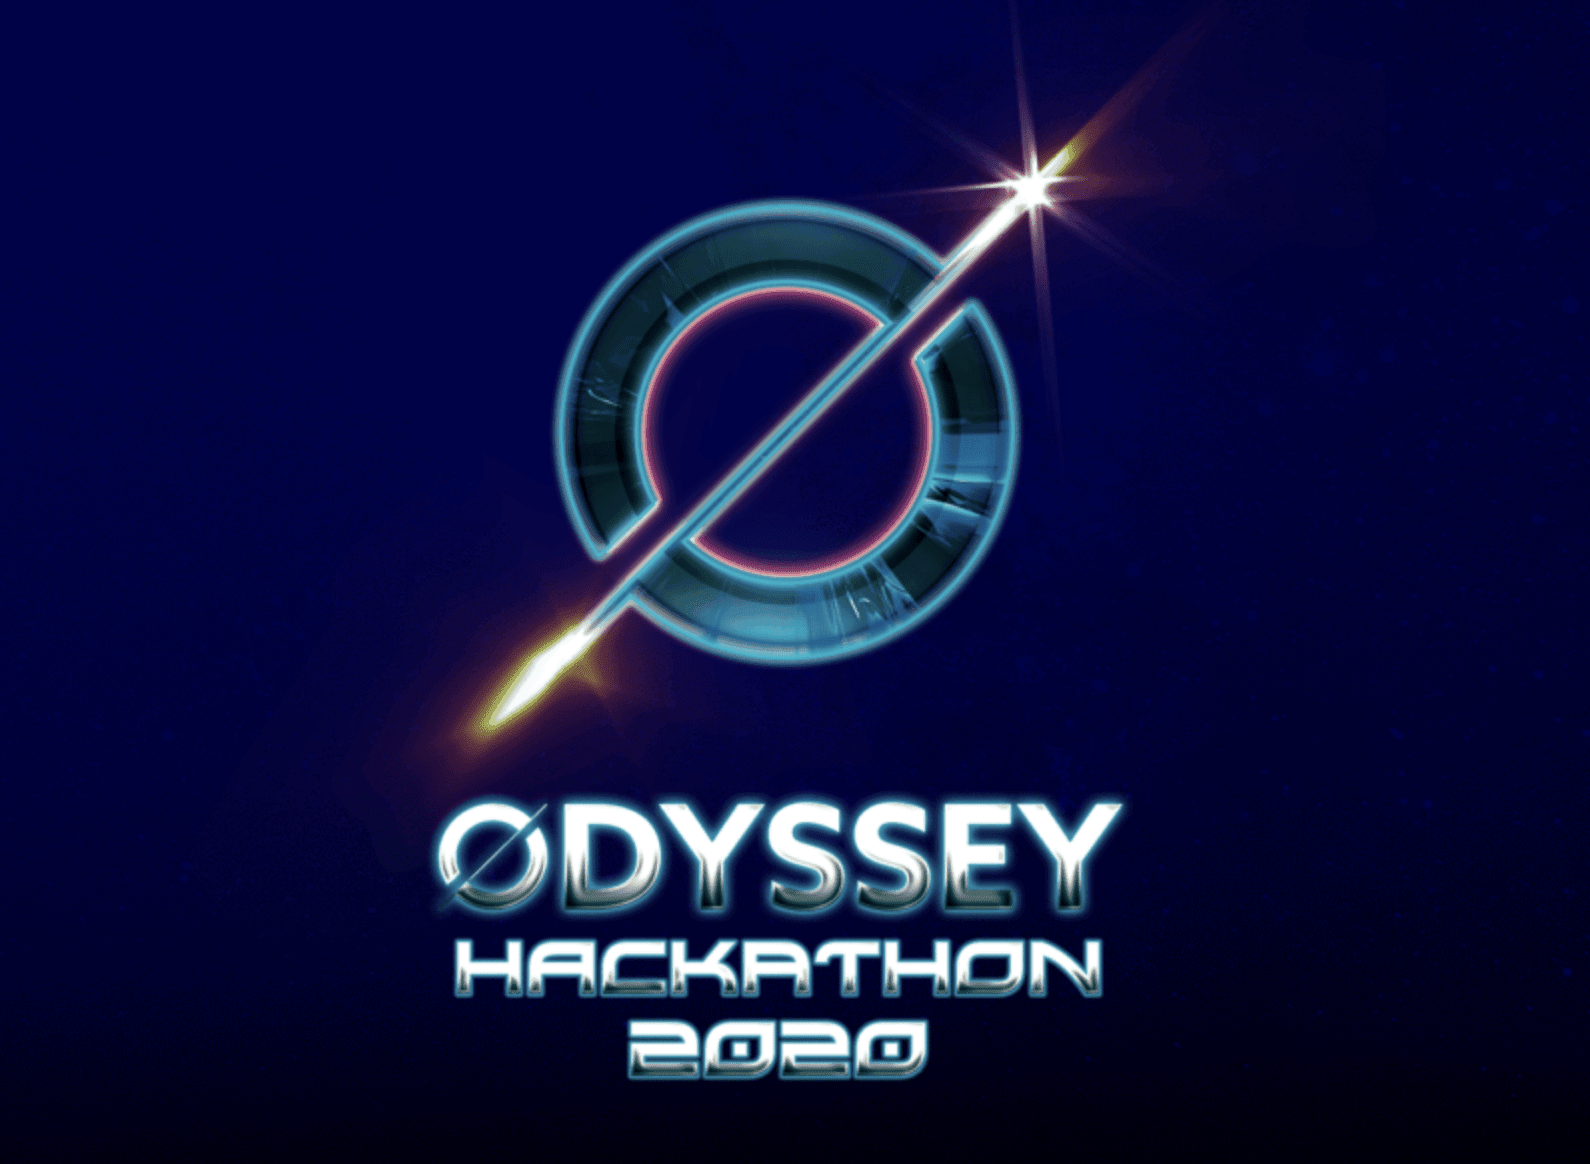 Join the Odyssey Hackathon 2020!